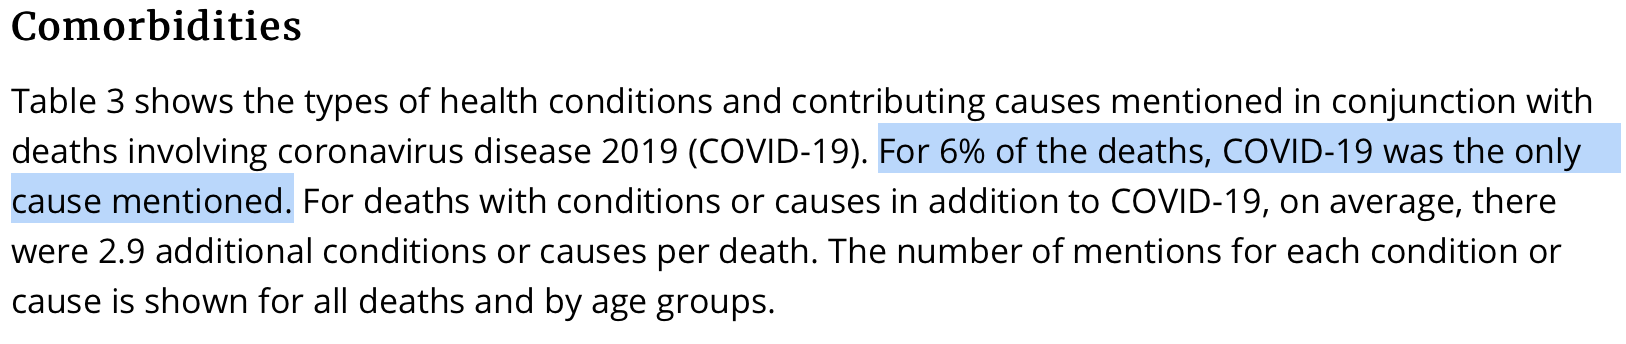 For 6% of the deaths, COVID-19 was the only cause mentioned.